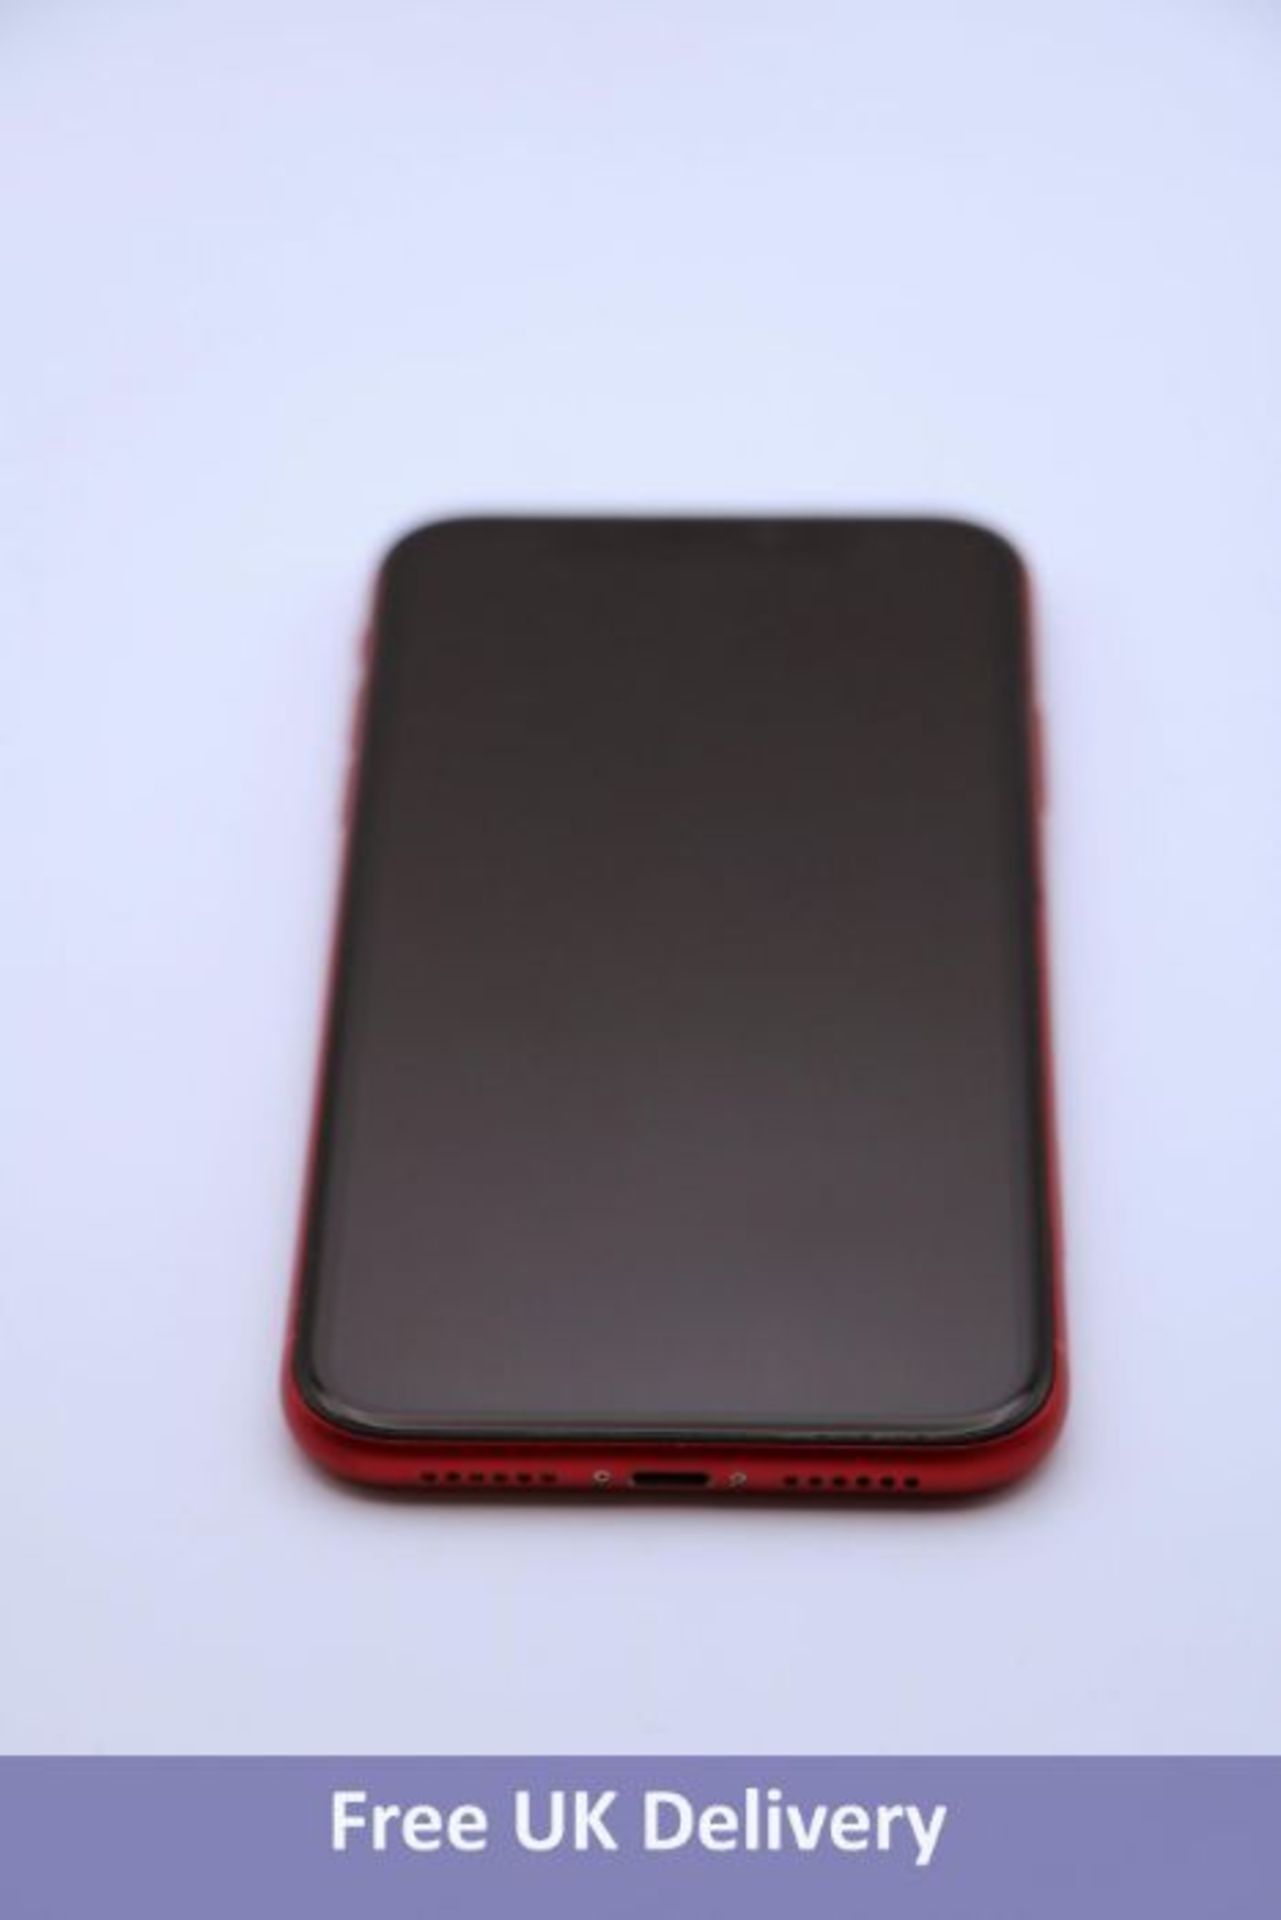 Apple iPhone XR 128GB Red, A1984. Used, refurbished, no box or accessories. Checkmend clear, ref. CM